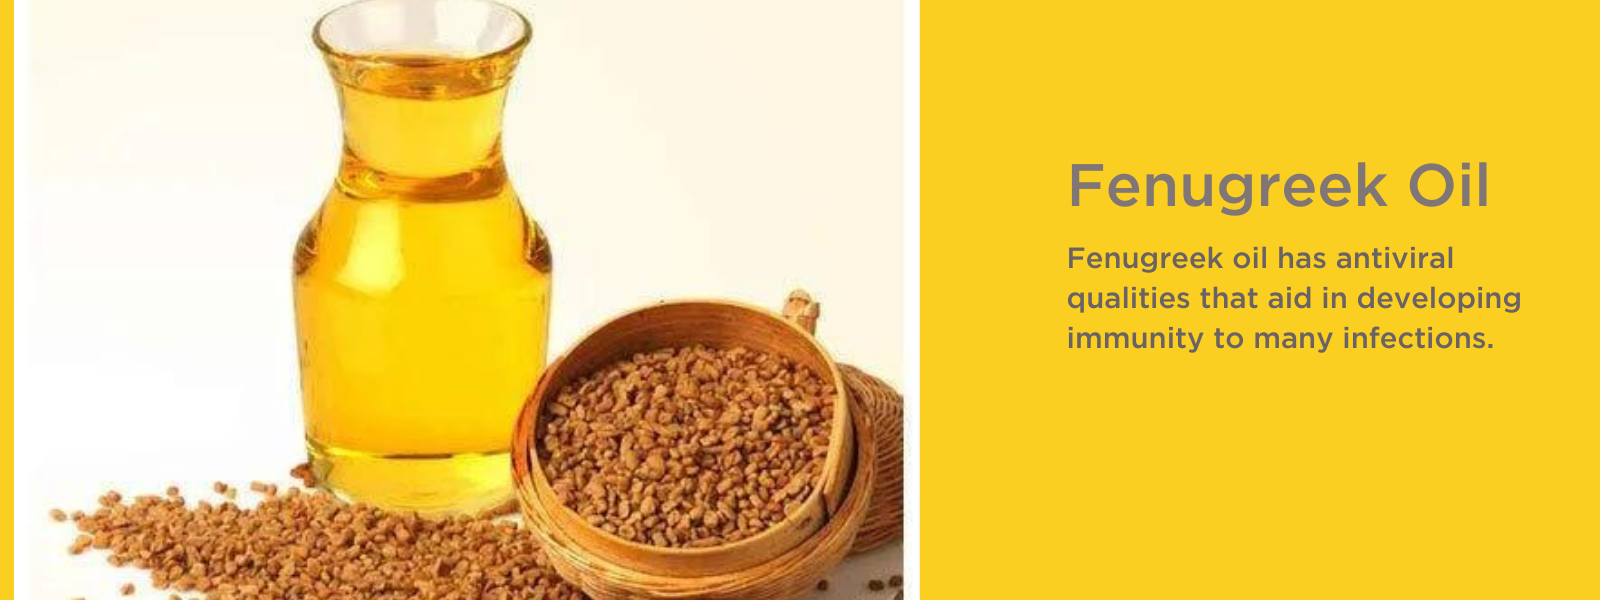 Fenugreek Oil- Health Benefits, Uses and Important Facts